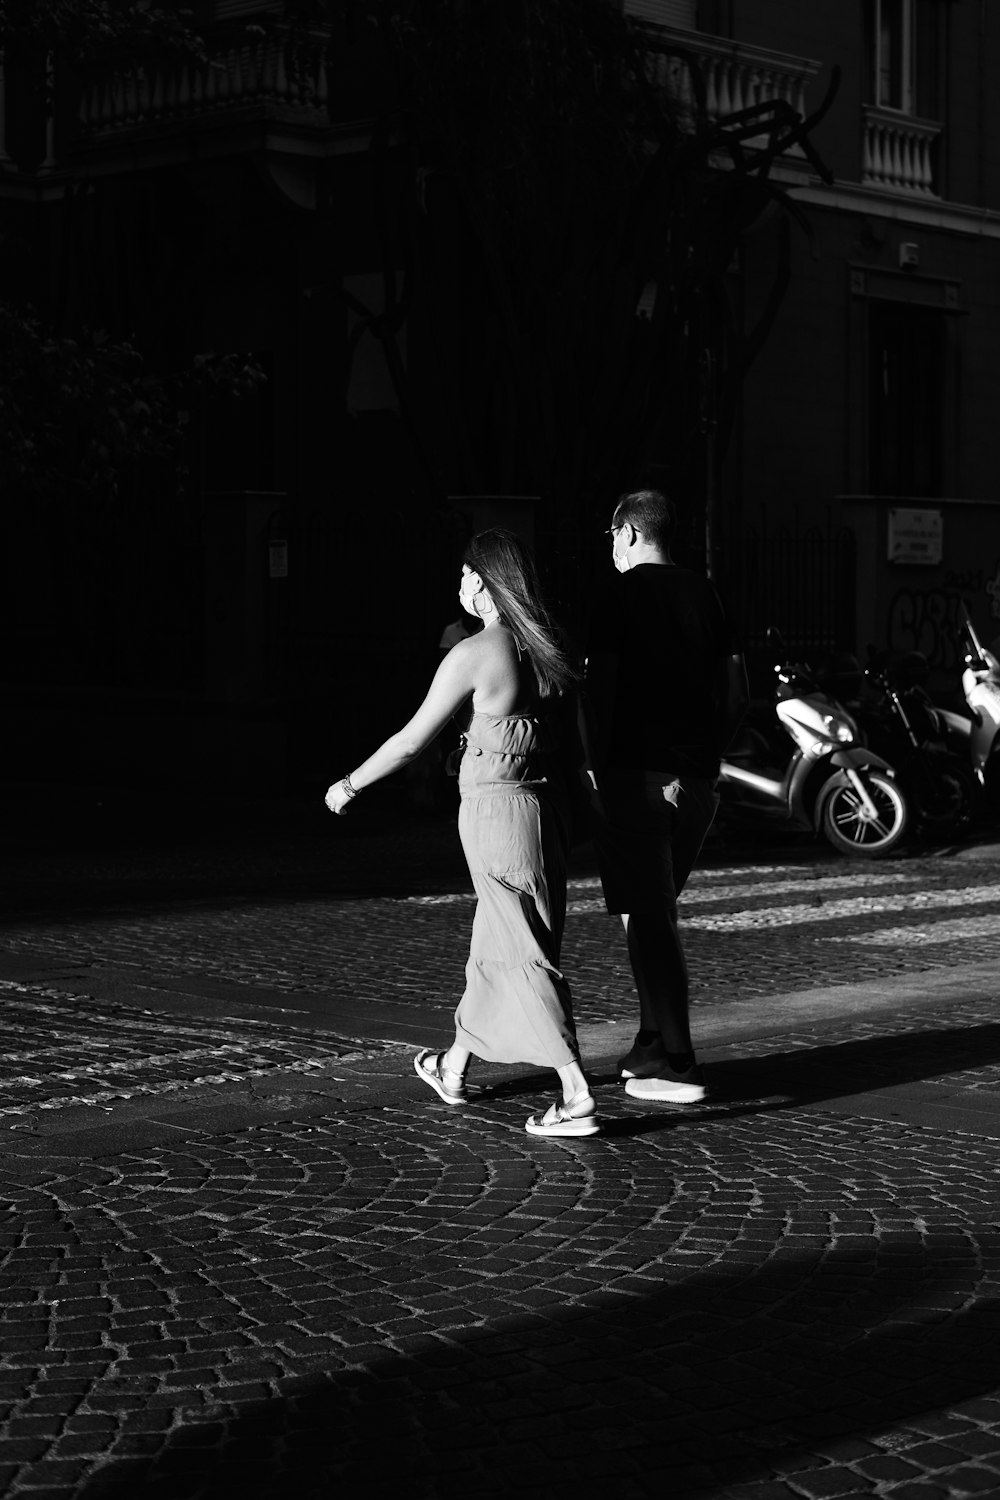 a man and a woman walking down a street